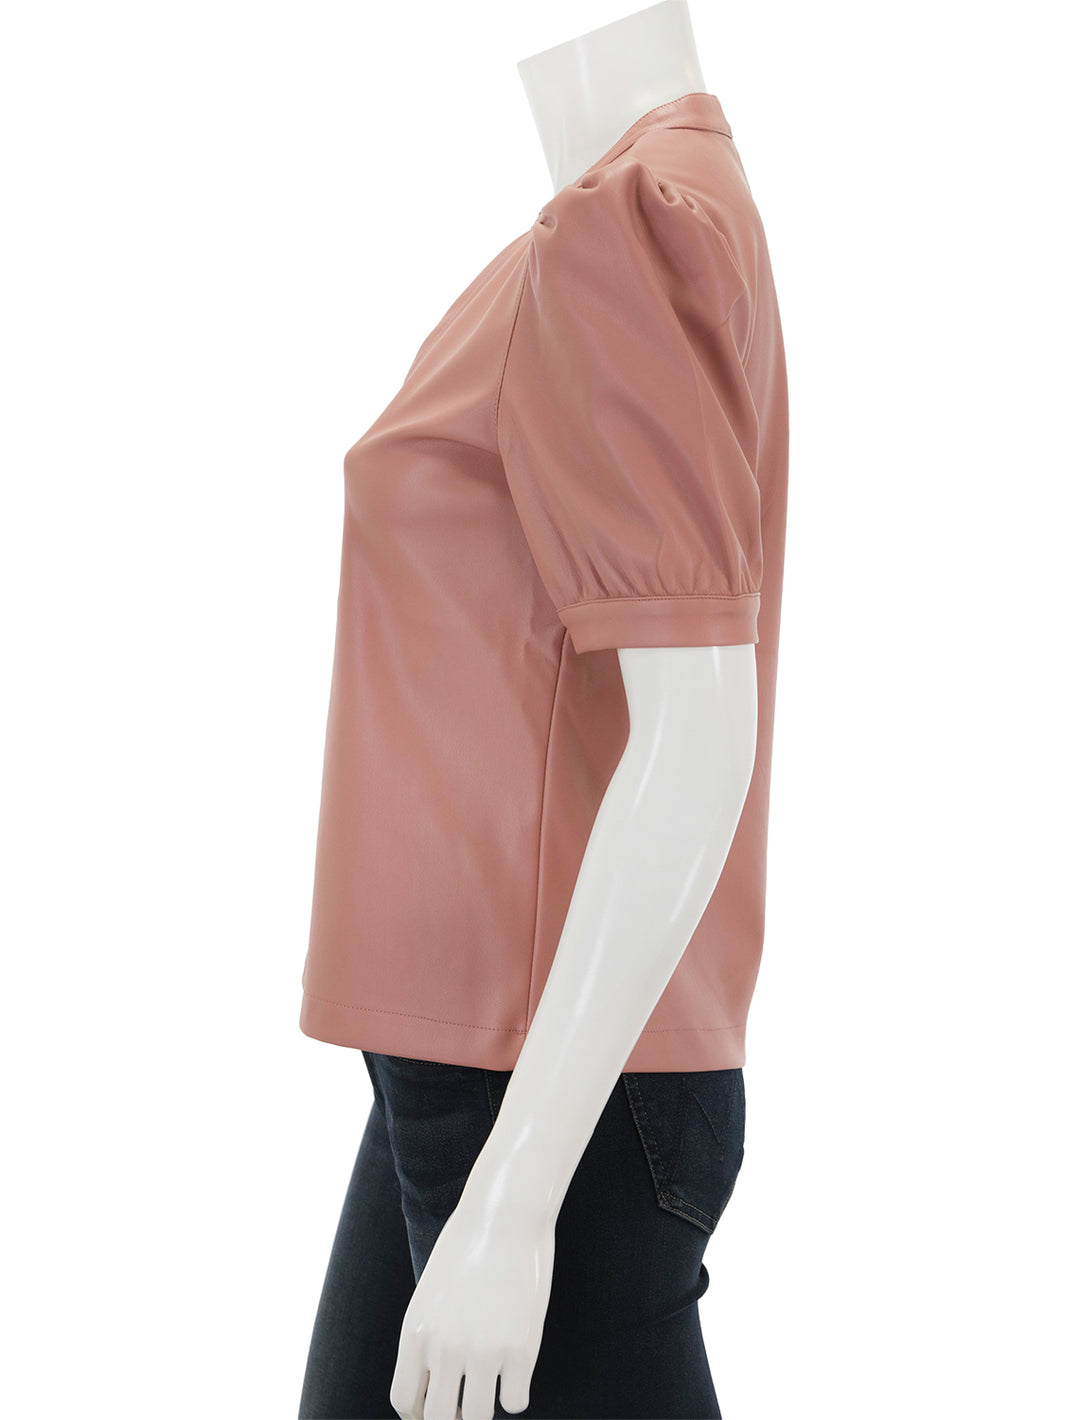 Side view of Steve Madden's jane top in rose.